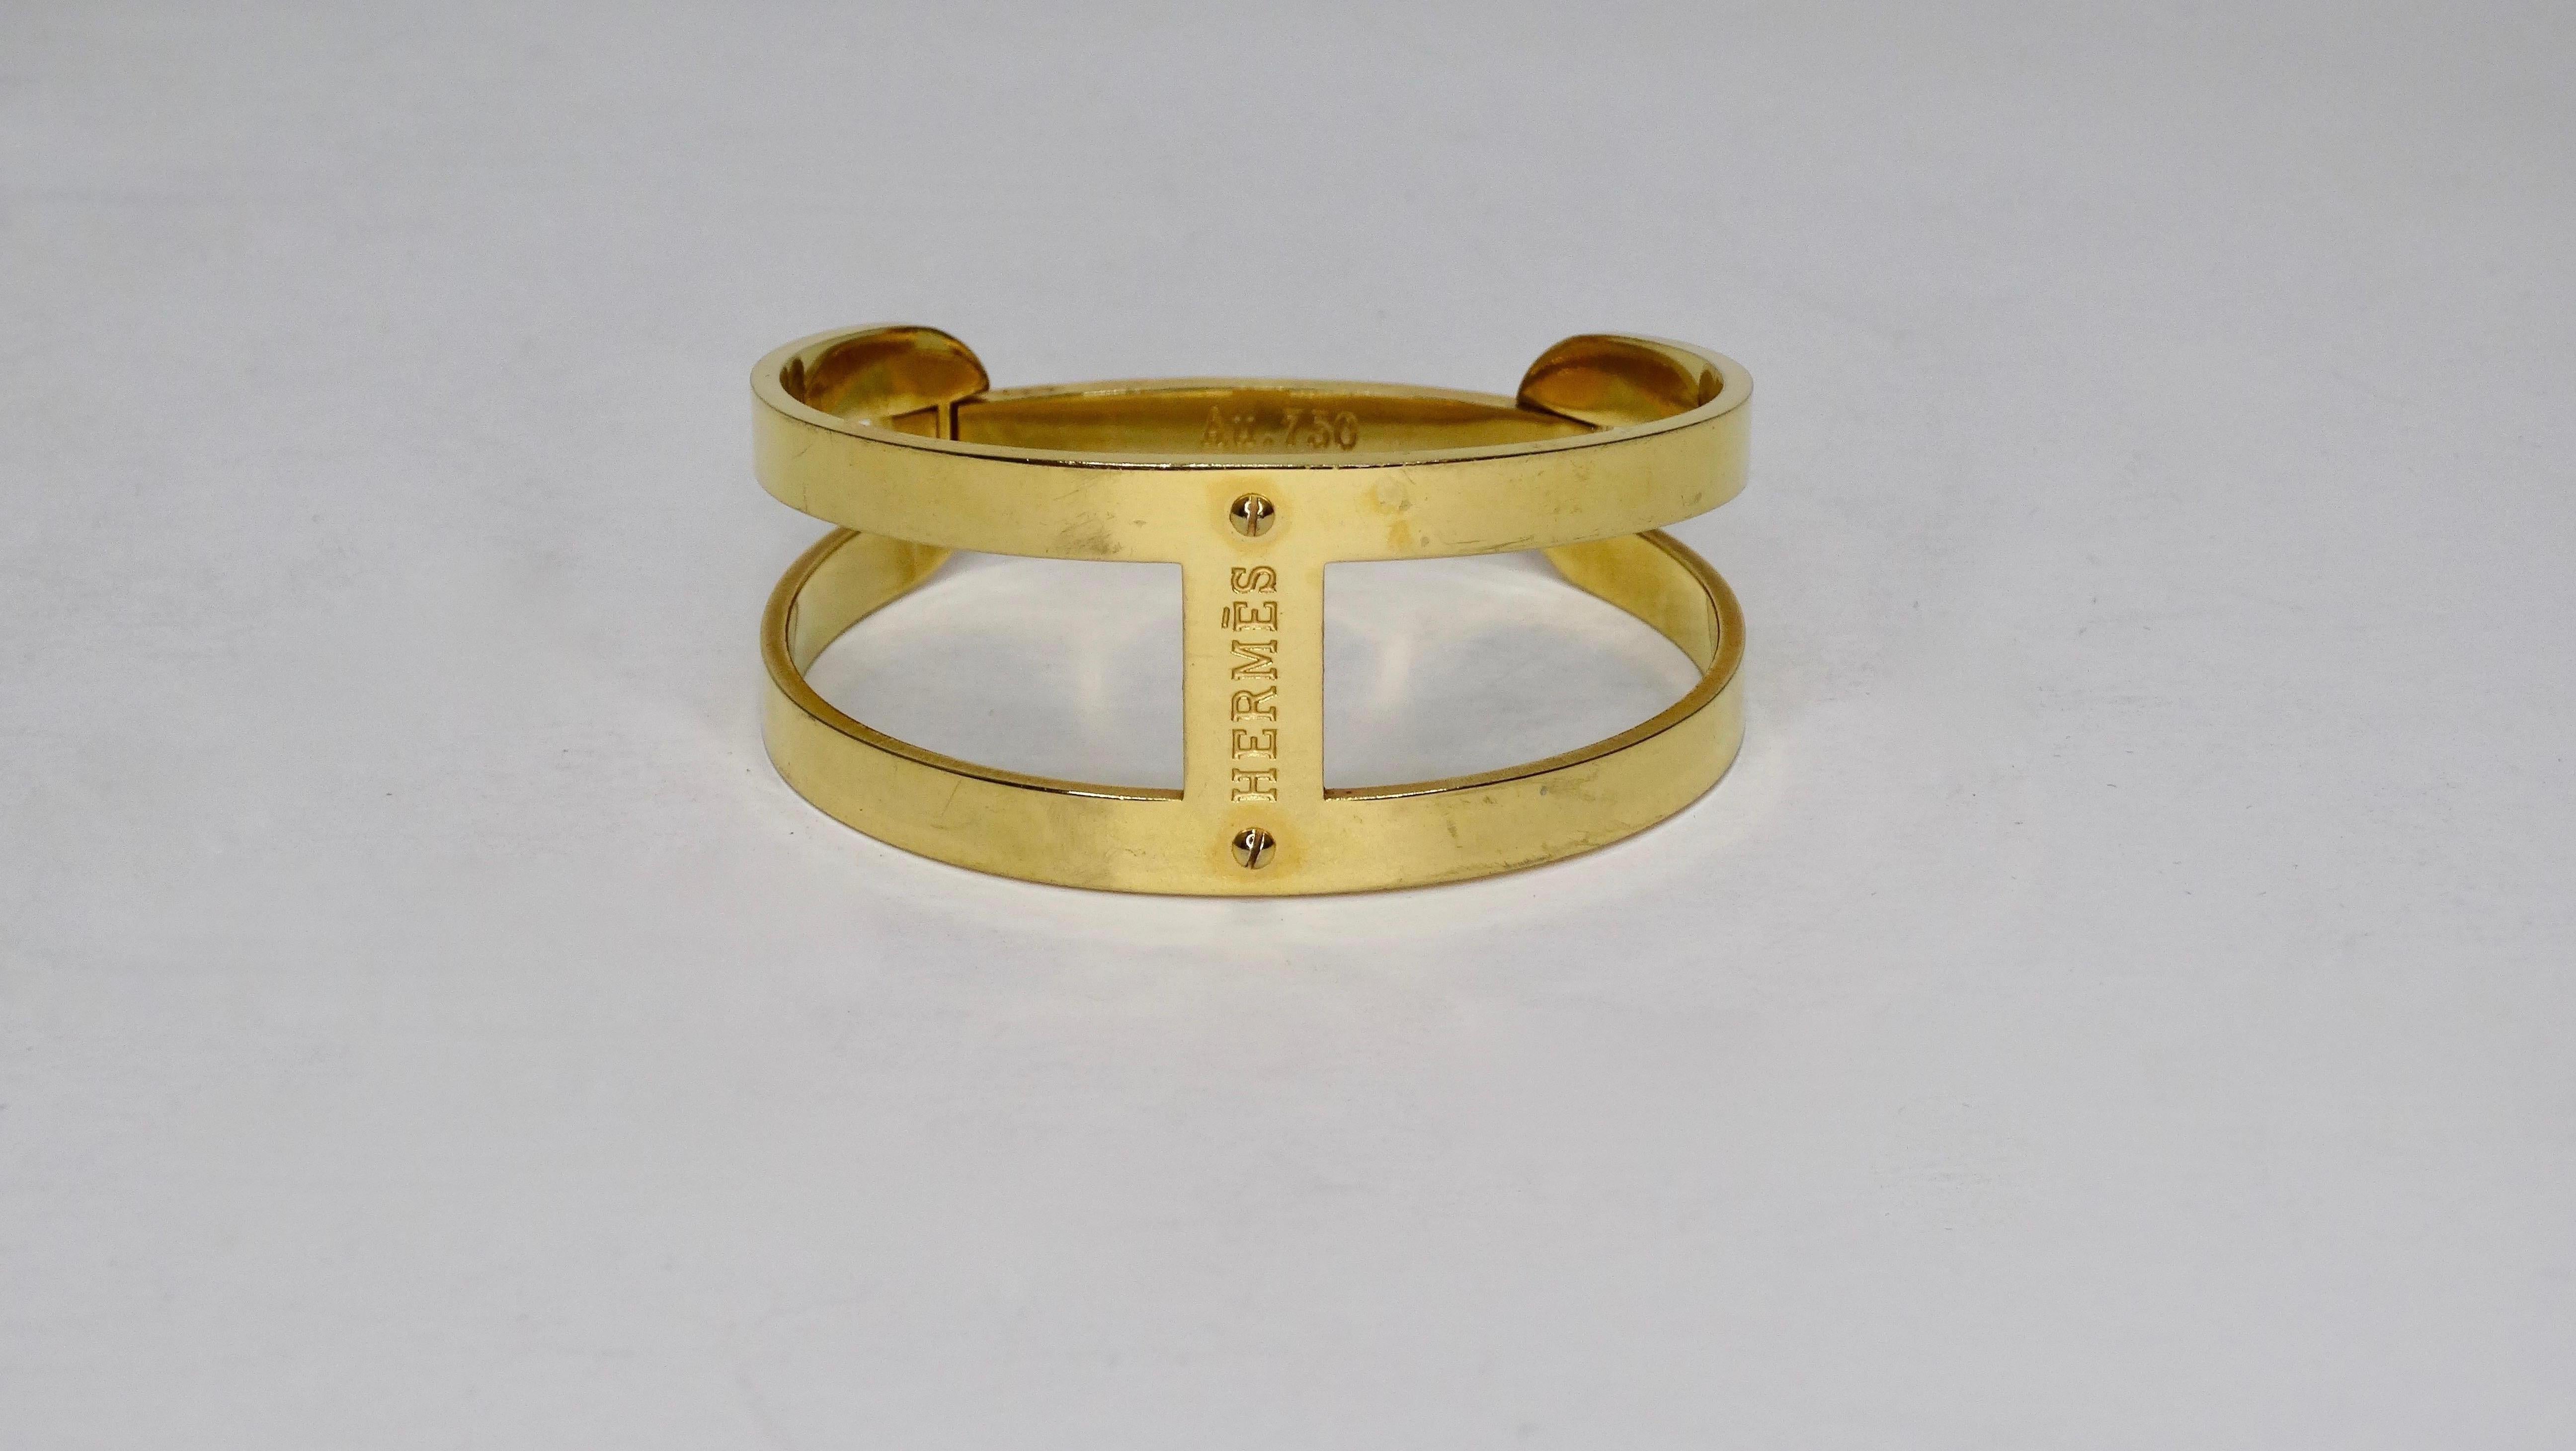 Hello Hermes! Circa 1970s, this Hermes bracelet is in 18k gold and features dual bars with Hermes stamped in the center. Includes a snap closure and is stamped Au. 750 (denoting this piece is 18k gold). Minimalistic and timeless, this Hermes